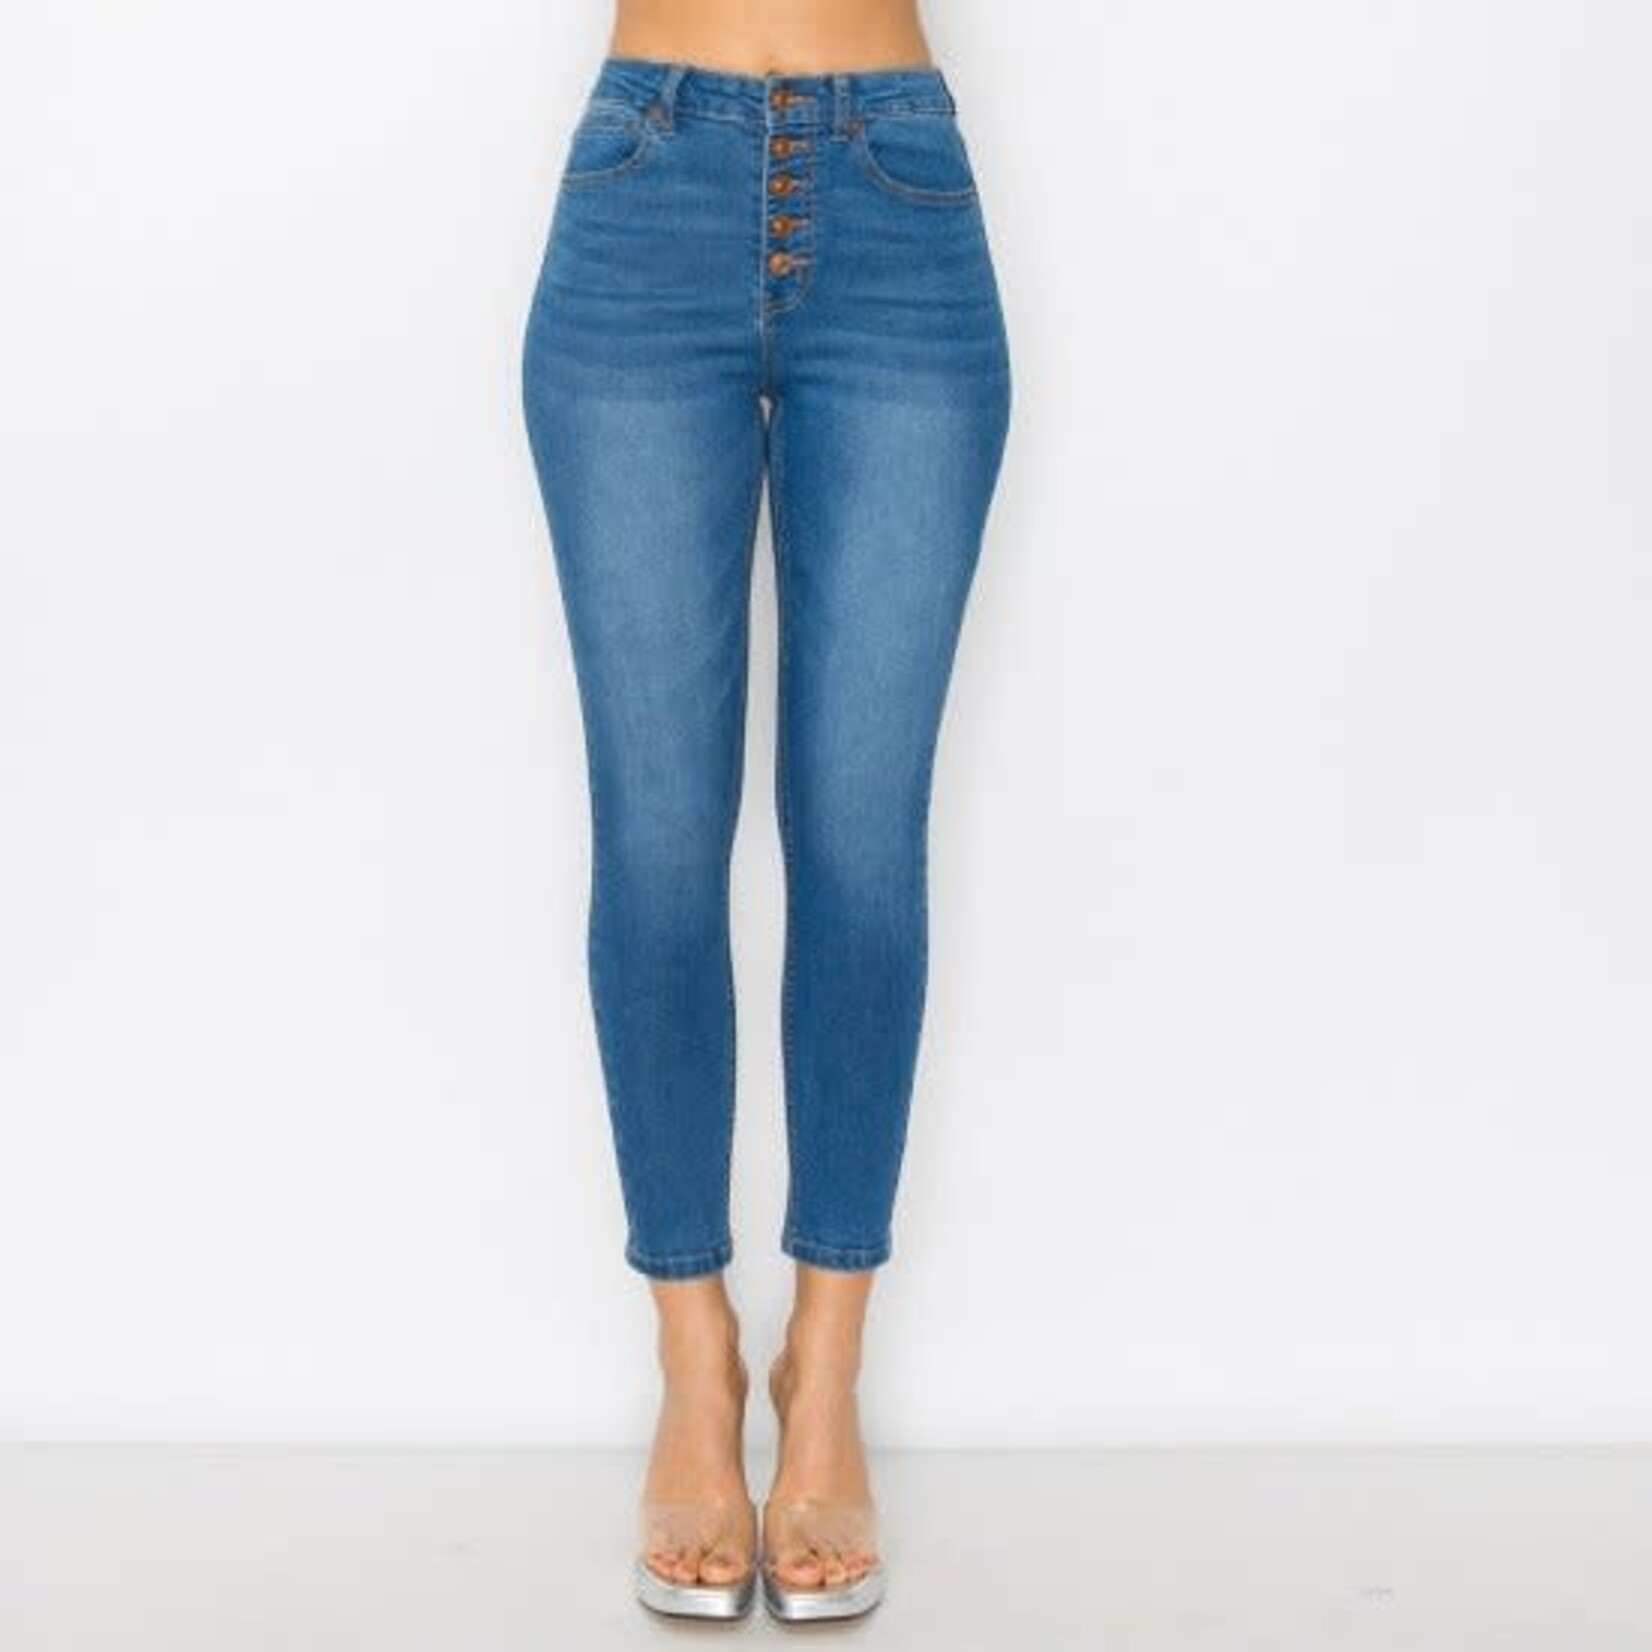 Wax Jeans Wax Jean - High-Rise Exposed Button Fly Skinny Jean - 90305